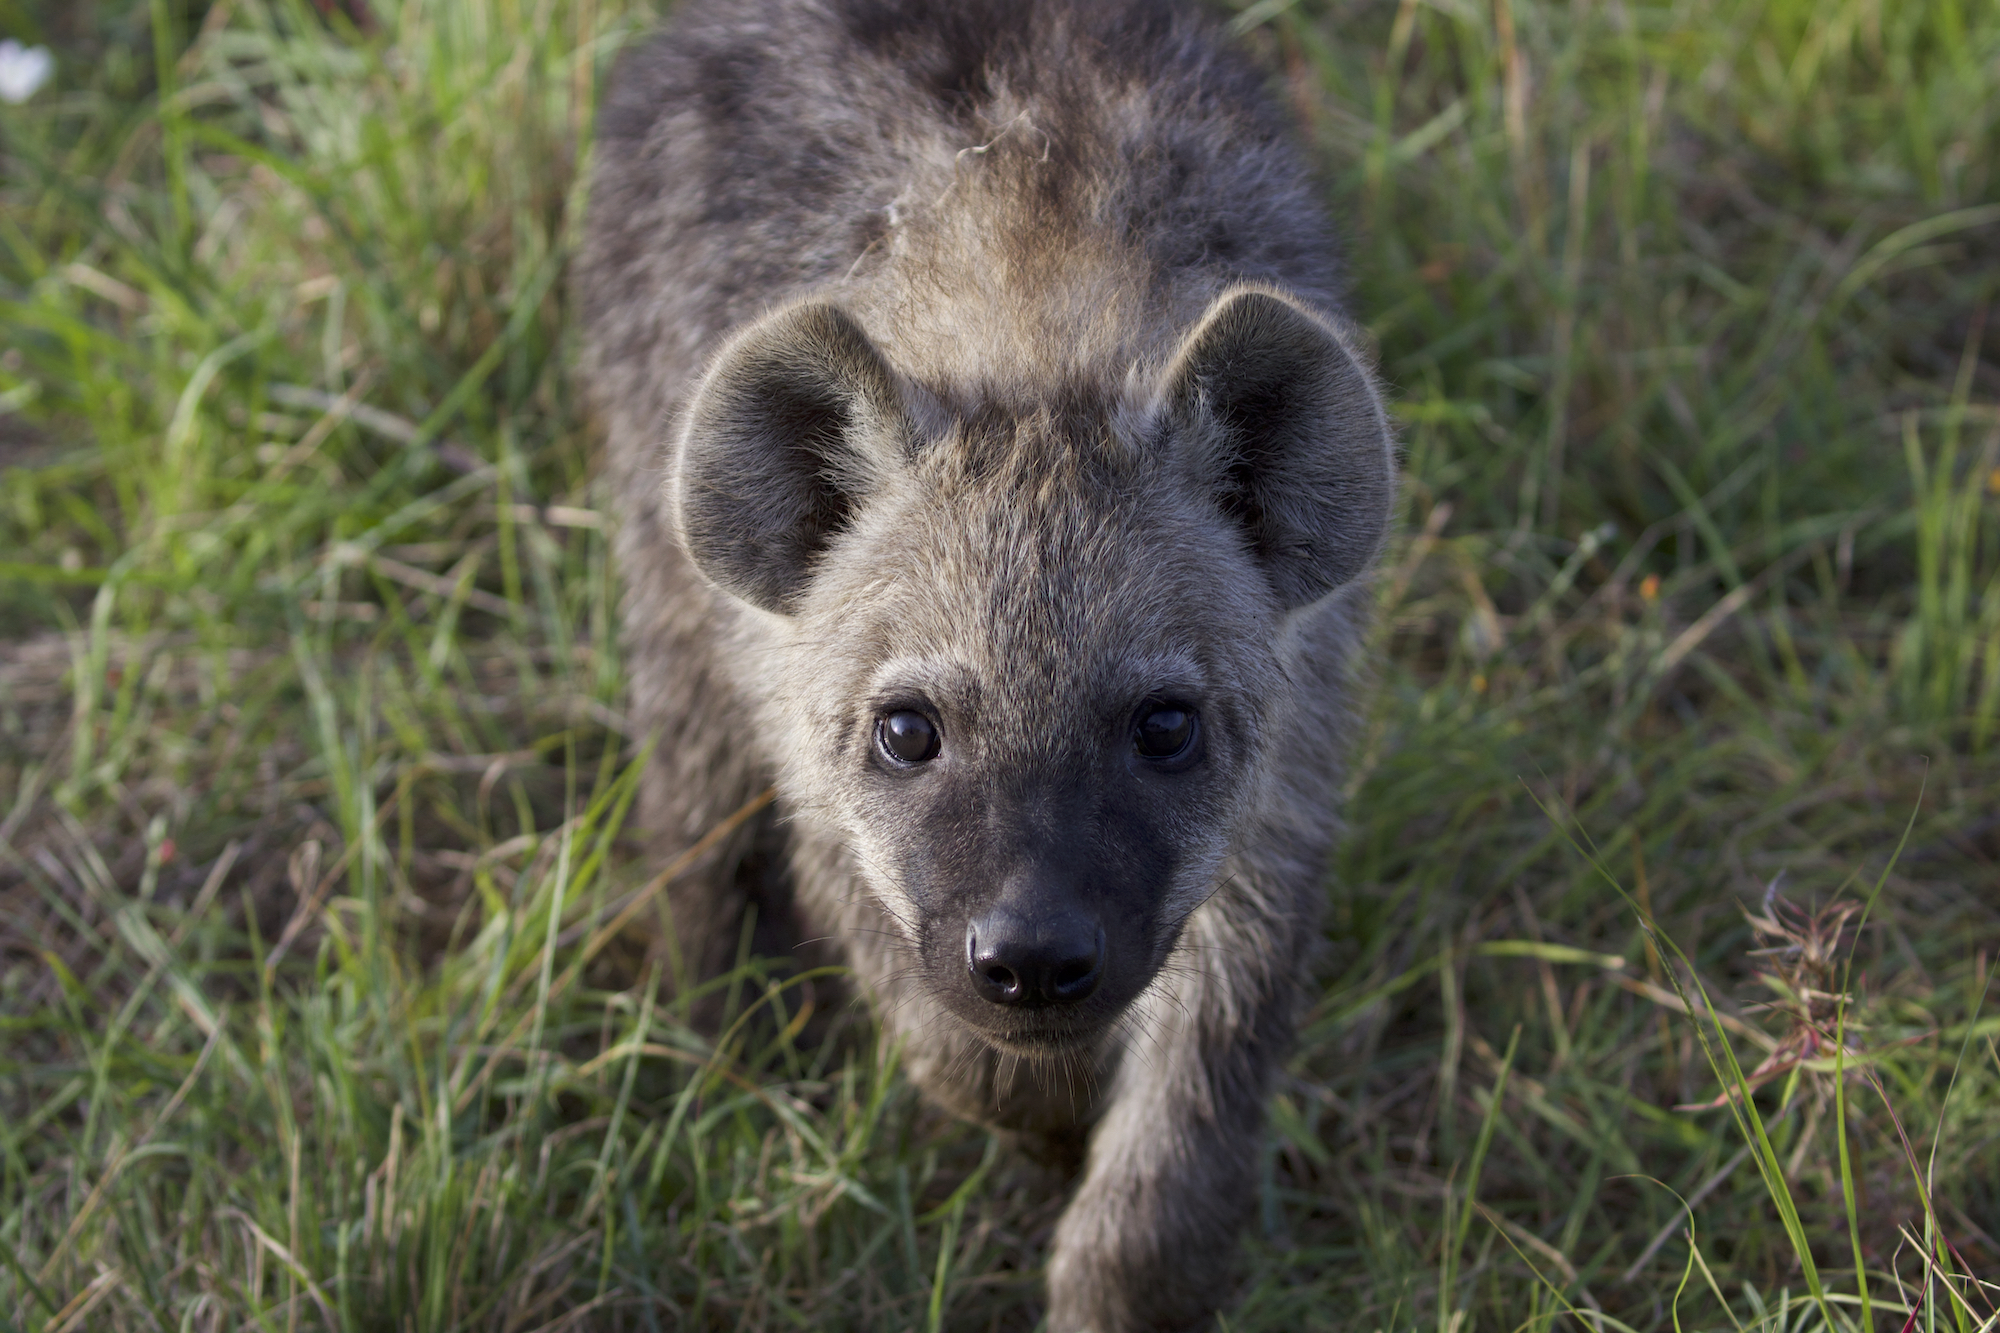 A young hyena